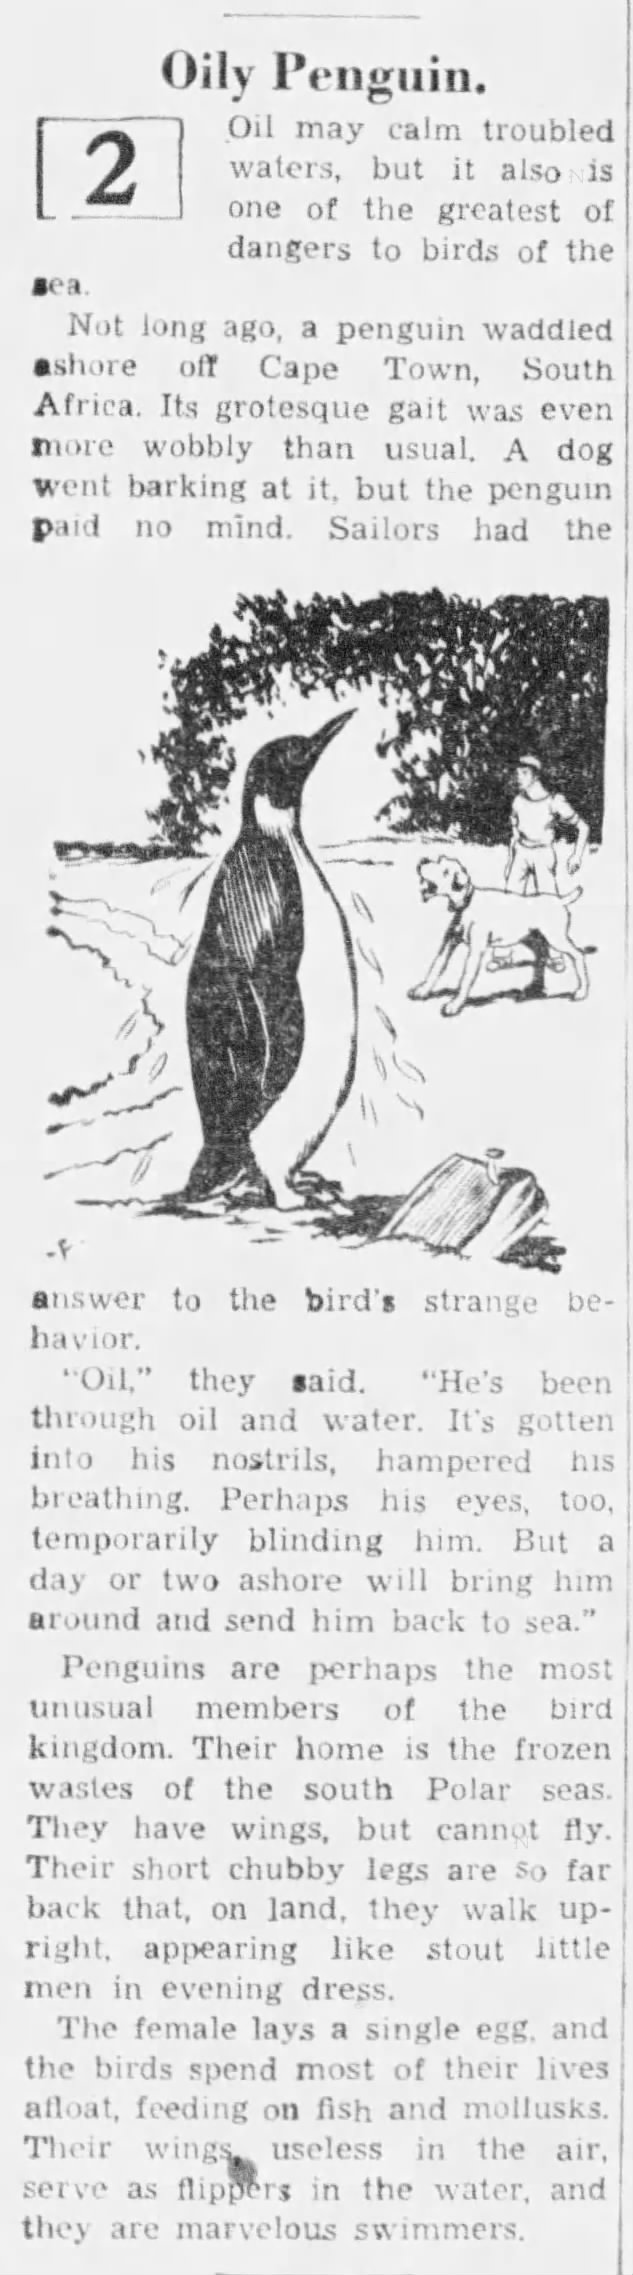 Oily penguin, South Africa (1936)